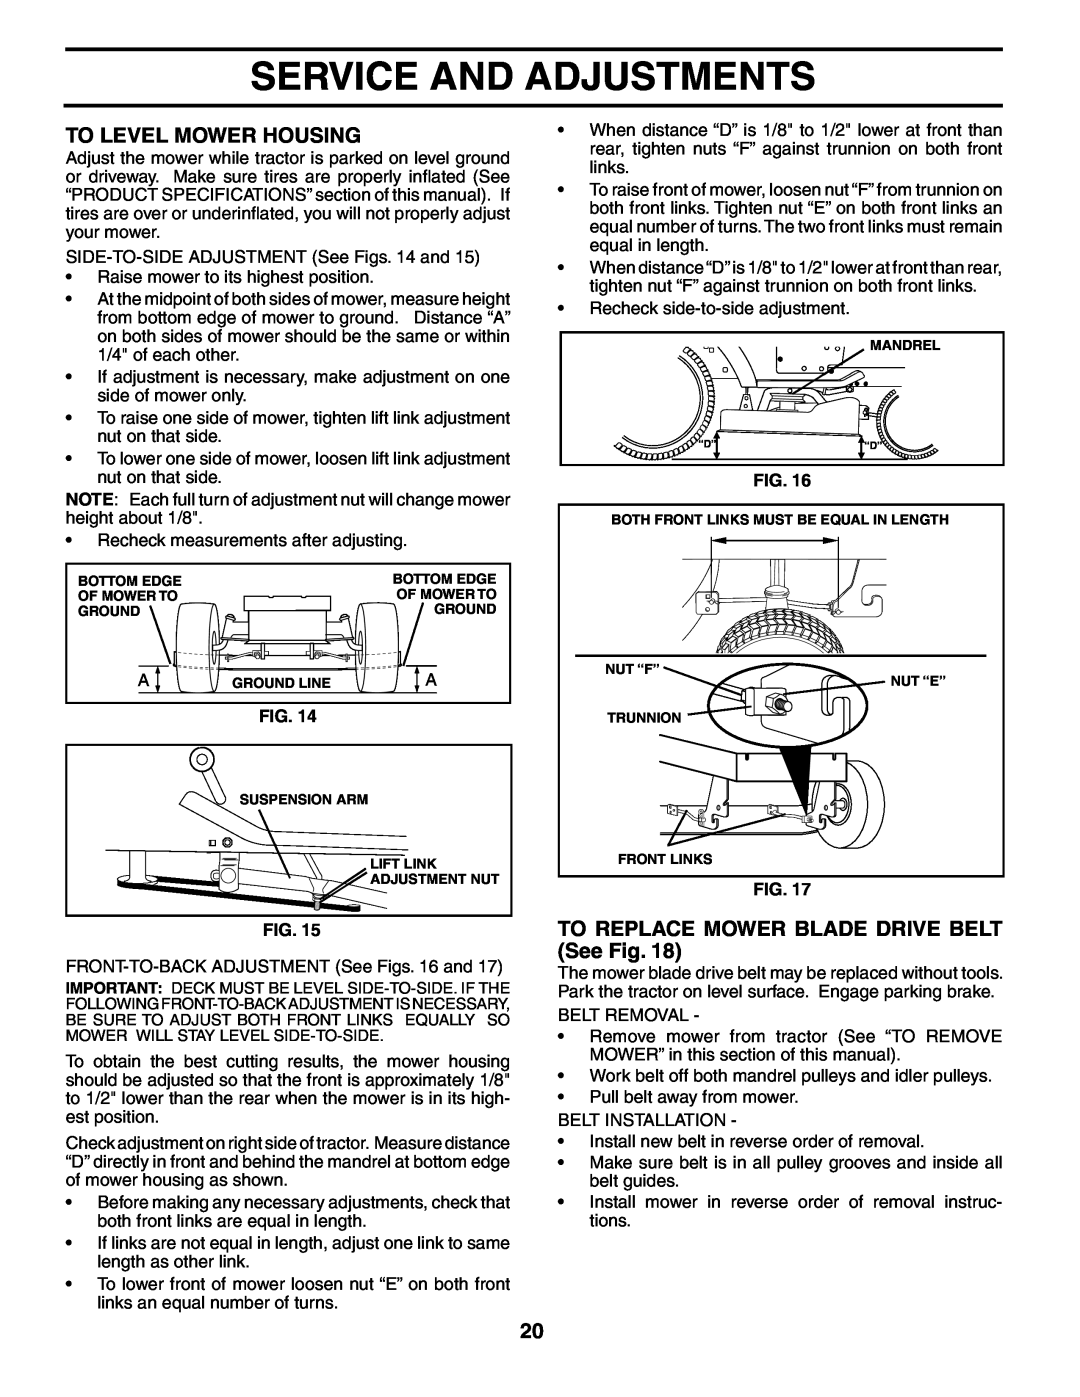 Poulan 194632 manual To Level Mower Housing, TO REPLACE MOWER BLADE DRIVE BELT See Fig, Service And Adjustments 